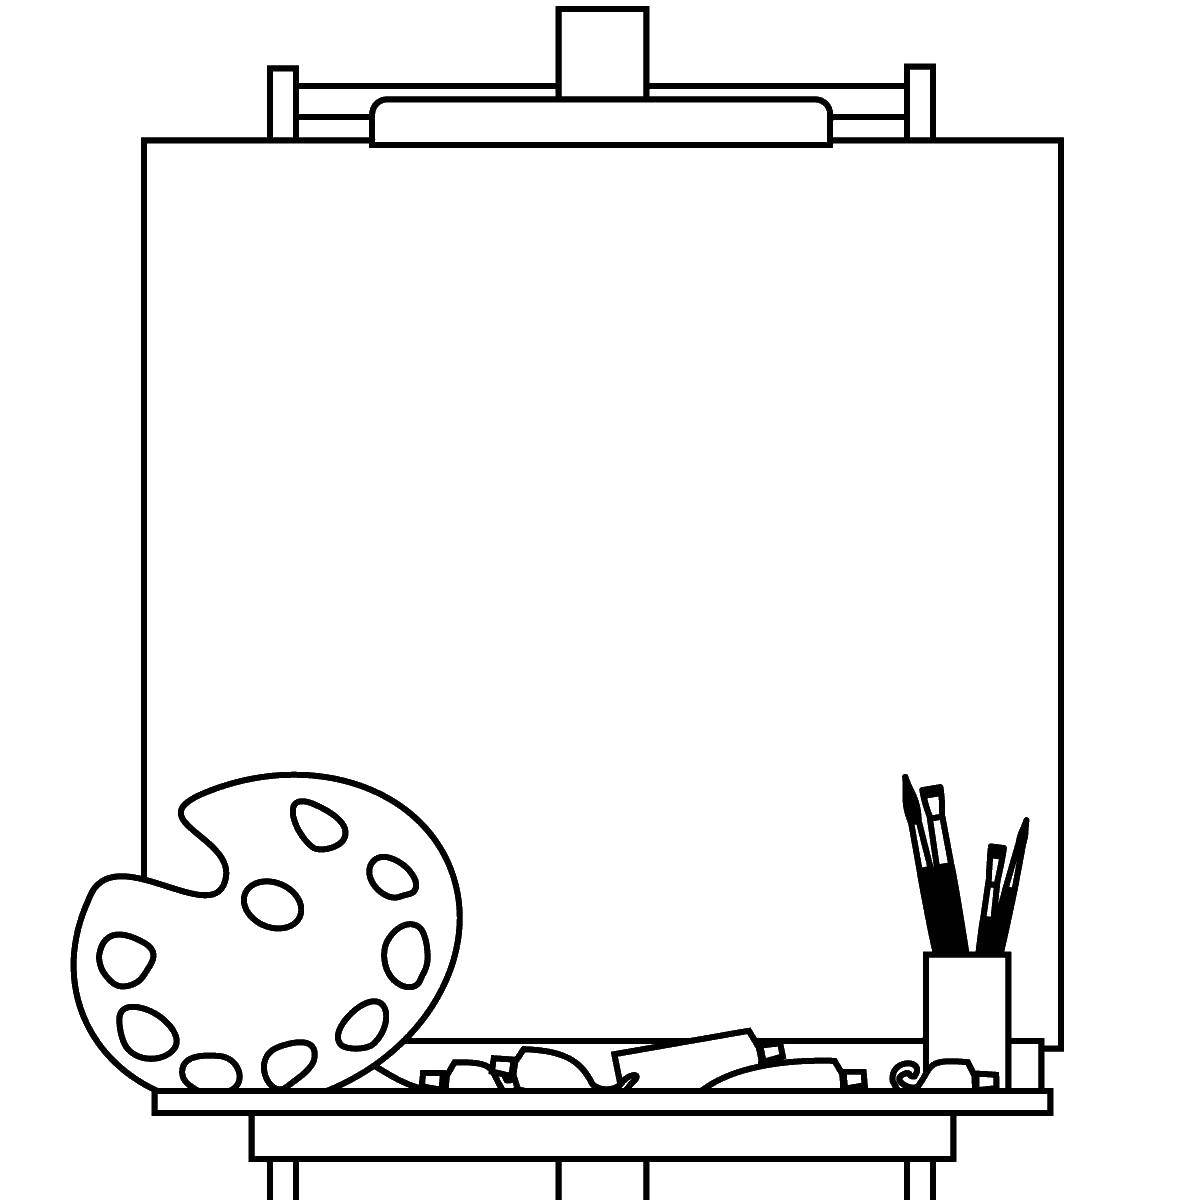 Coloring Canvas with brushes. Category the artist. Tags:  canvas, brushes, paint, easel.